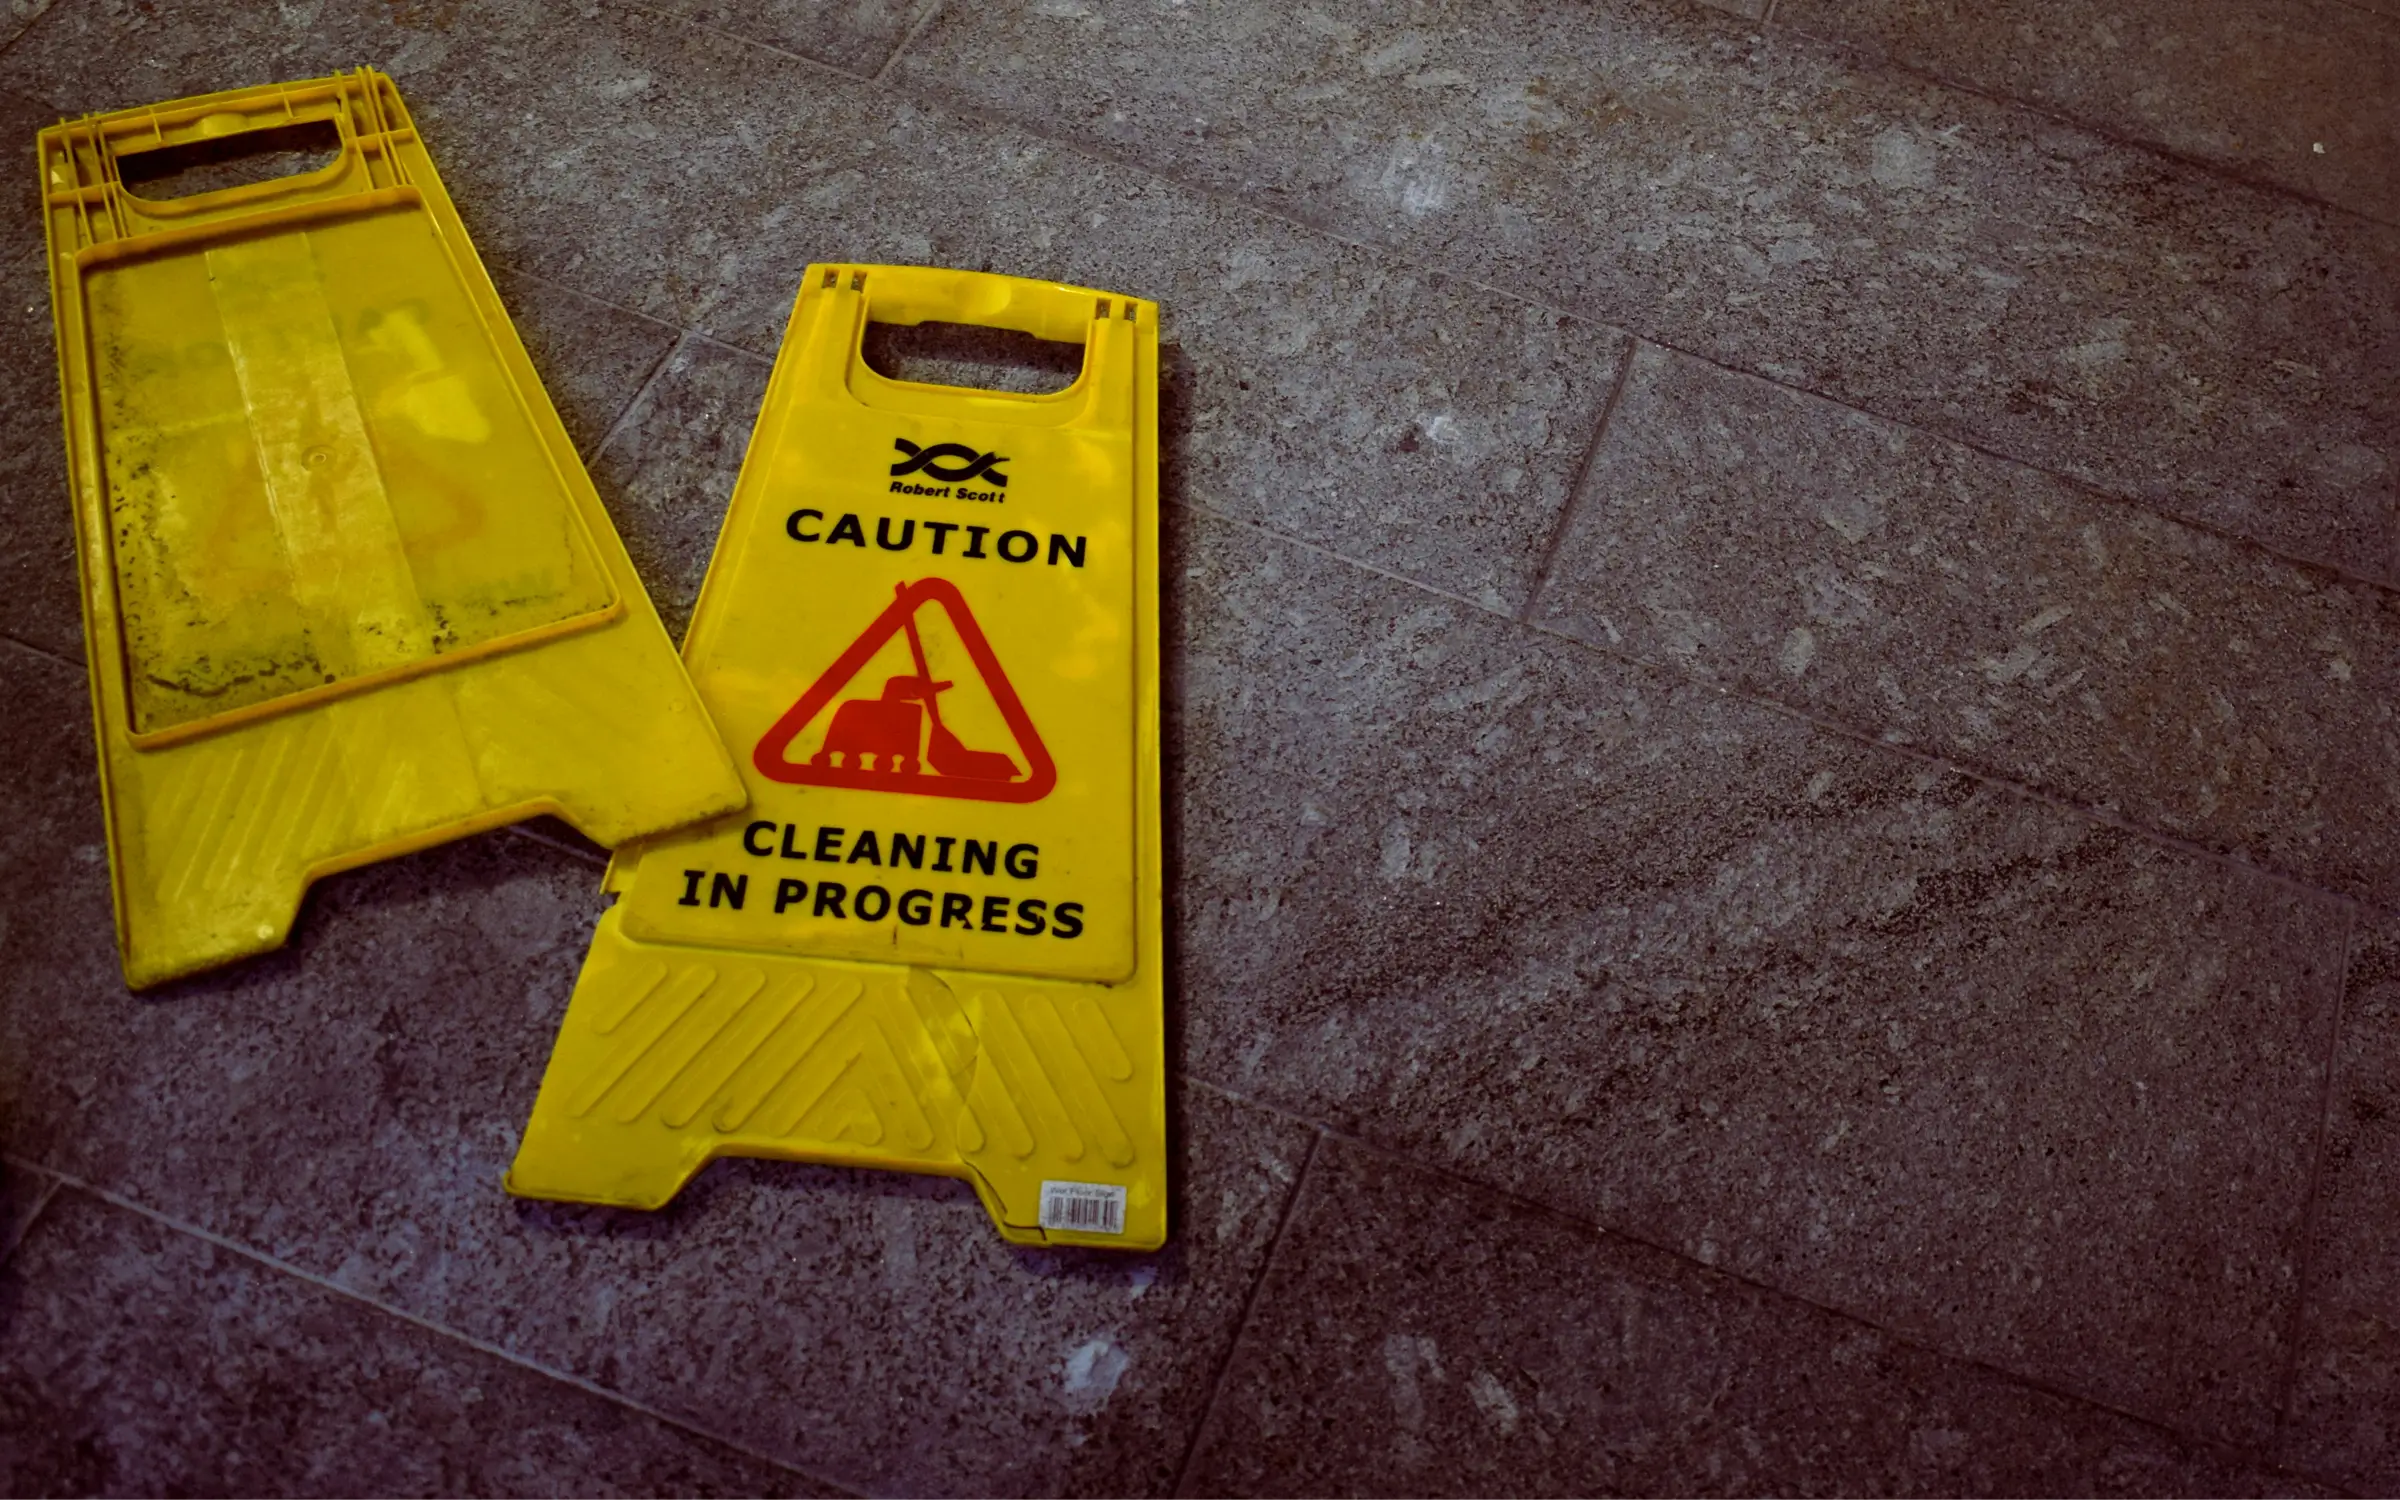 Slip and Fall Sign